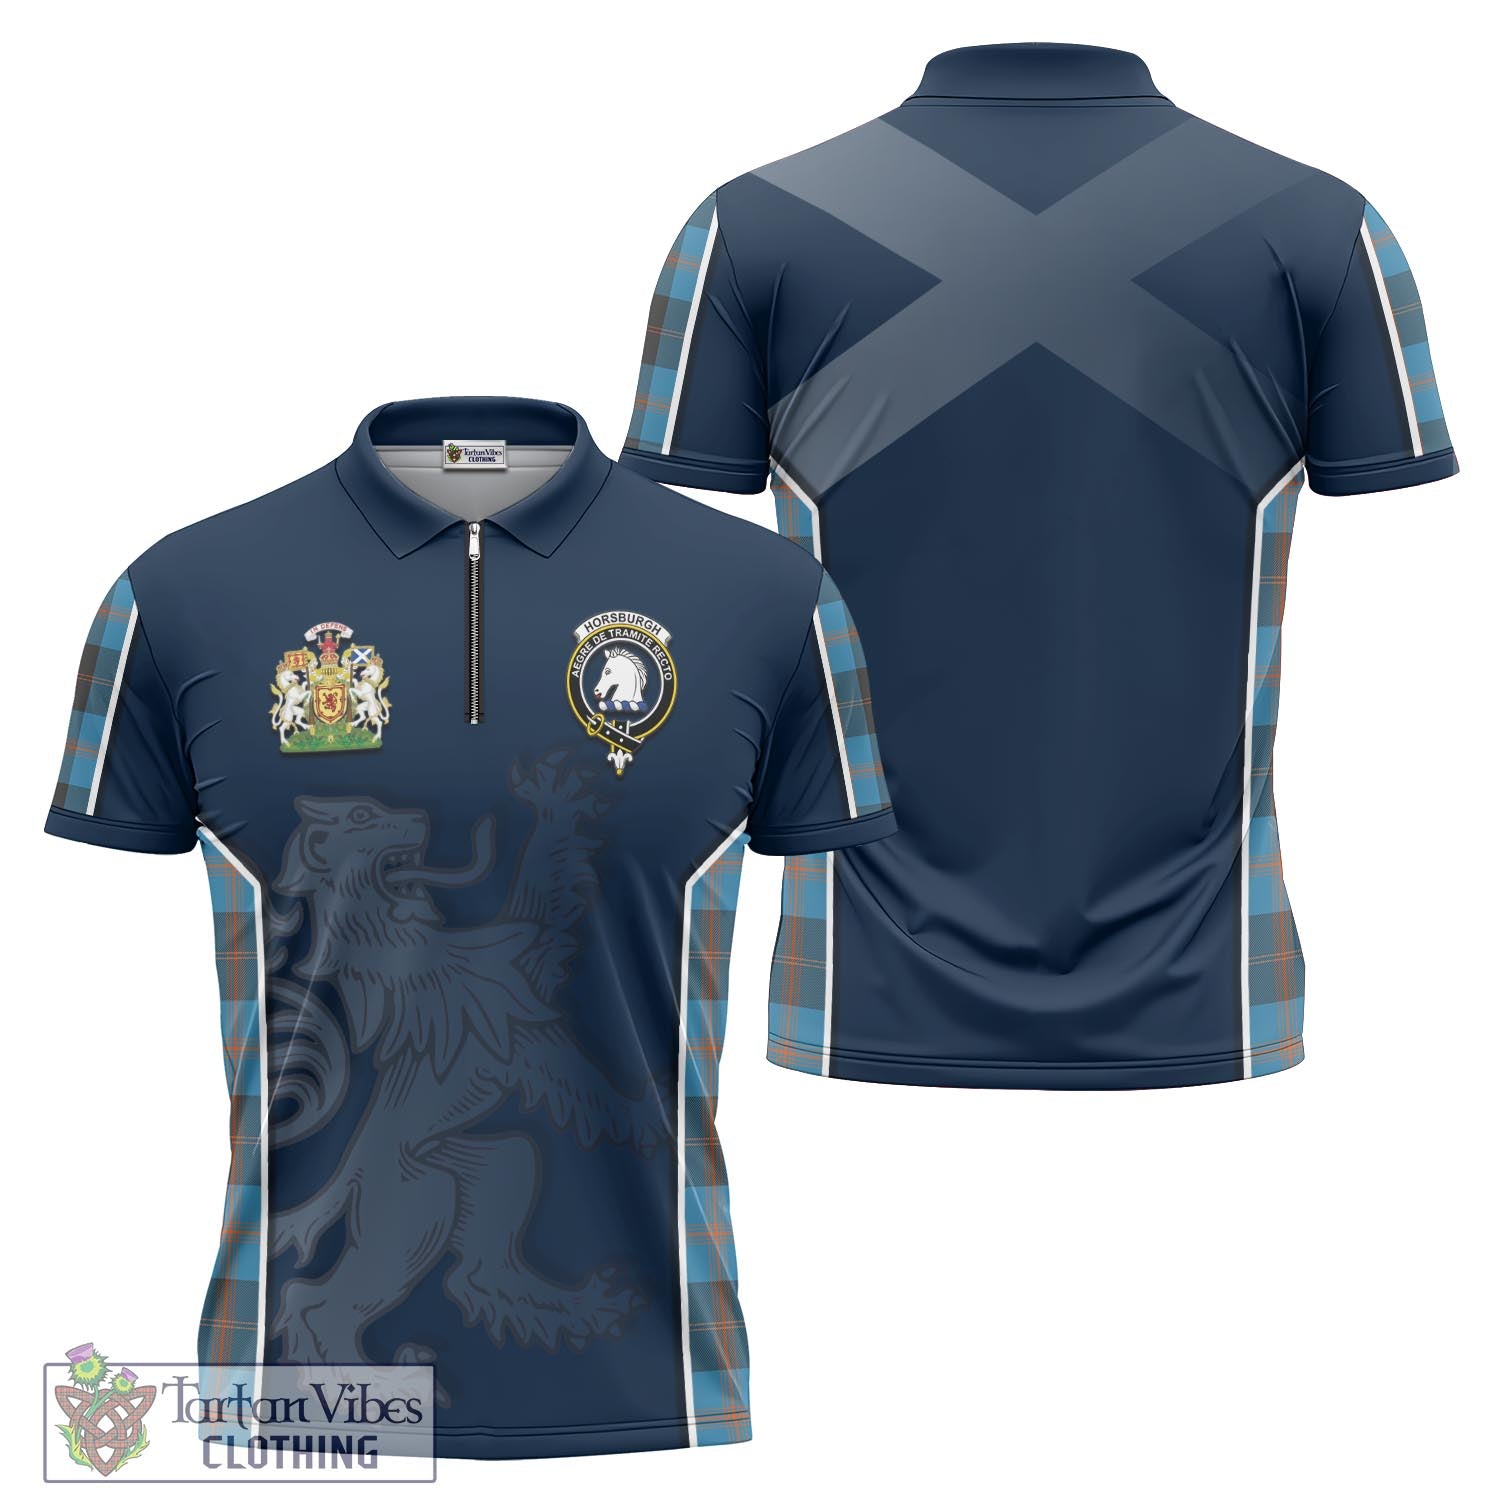 Tartan Vibes Clothing Horsburgh Tartan Zipper Polo Shirt with Family Crest and Lion Rampant Vibes Sport Style